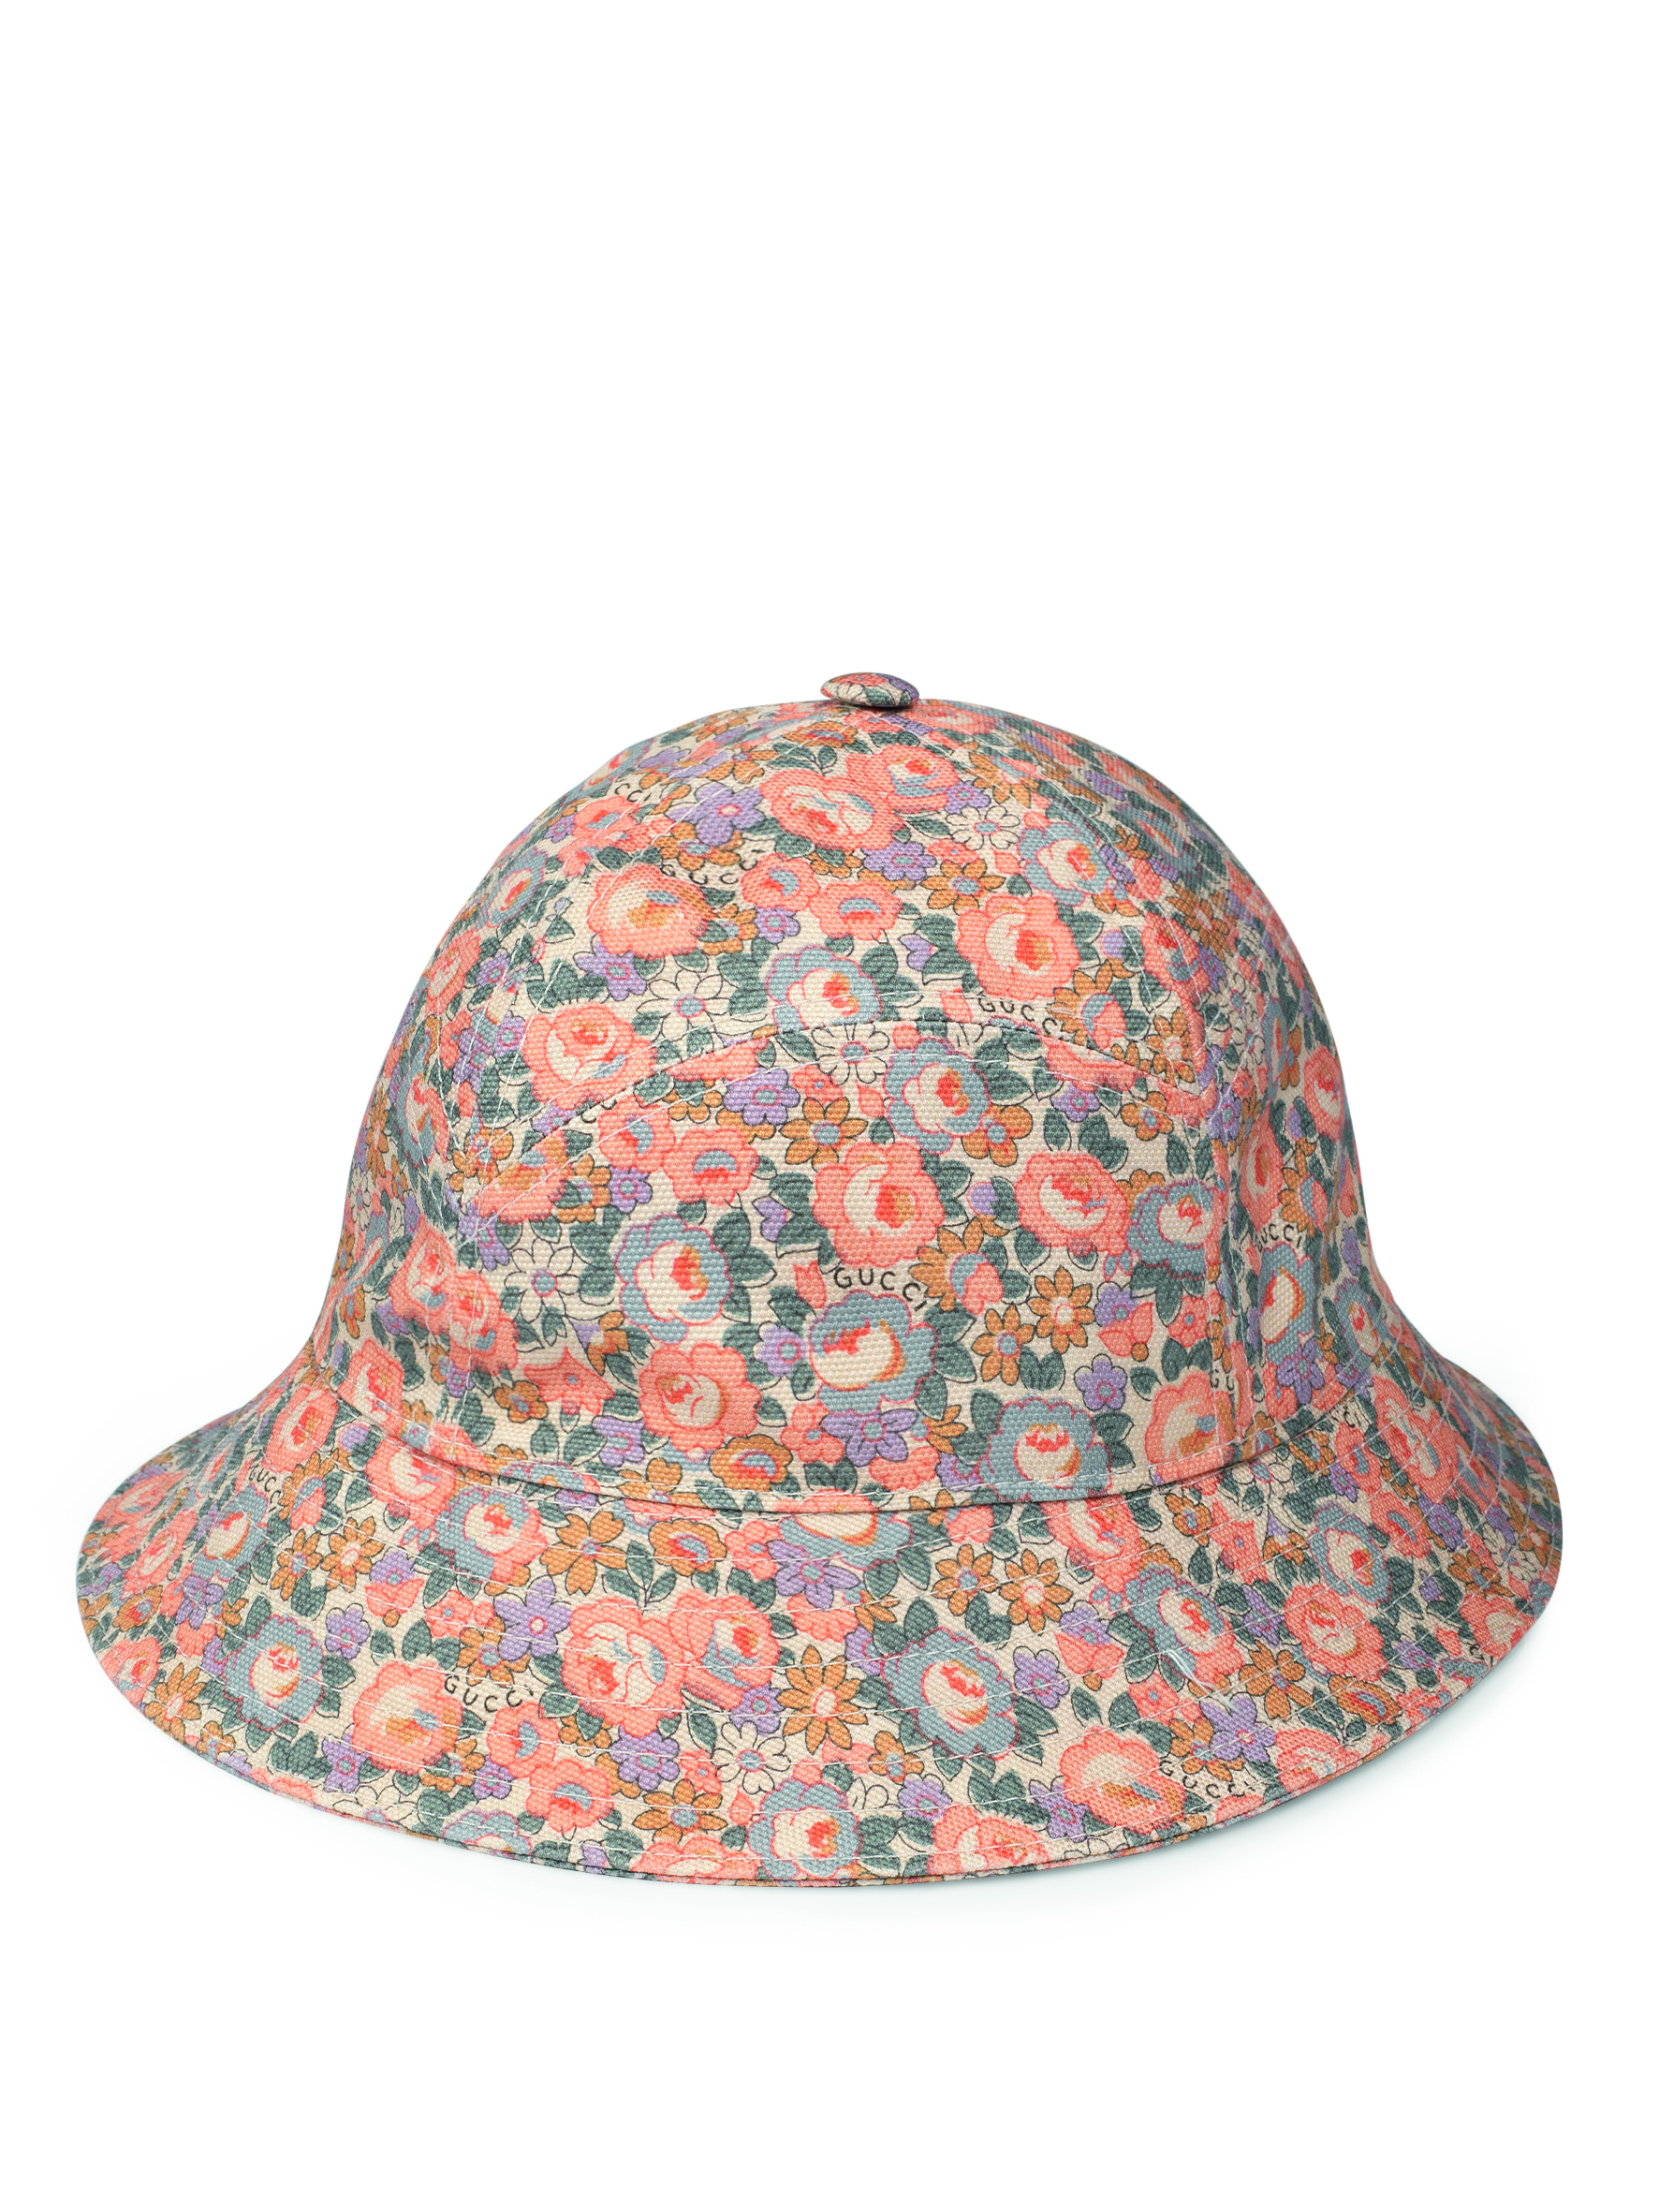 The Gucci Liberty Collection is Big on Vintage Flower Power - Men's Folio